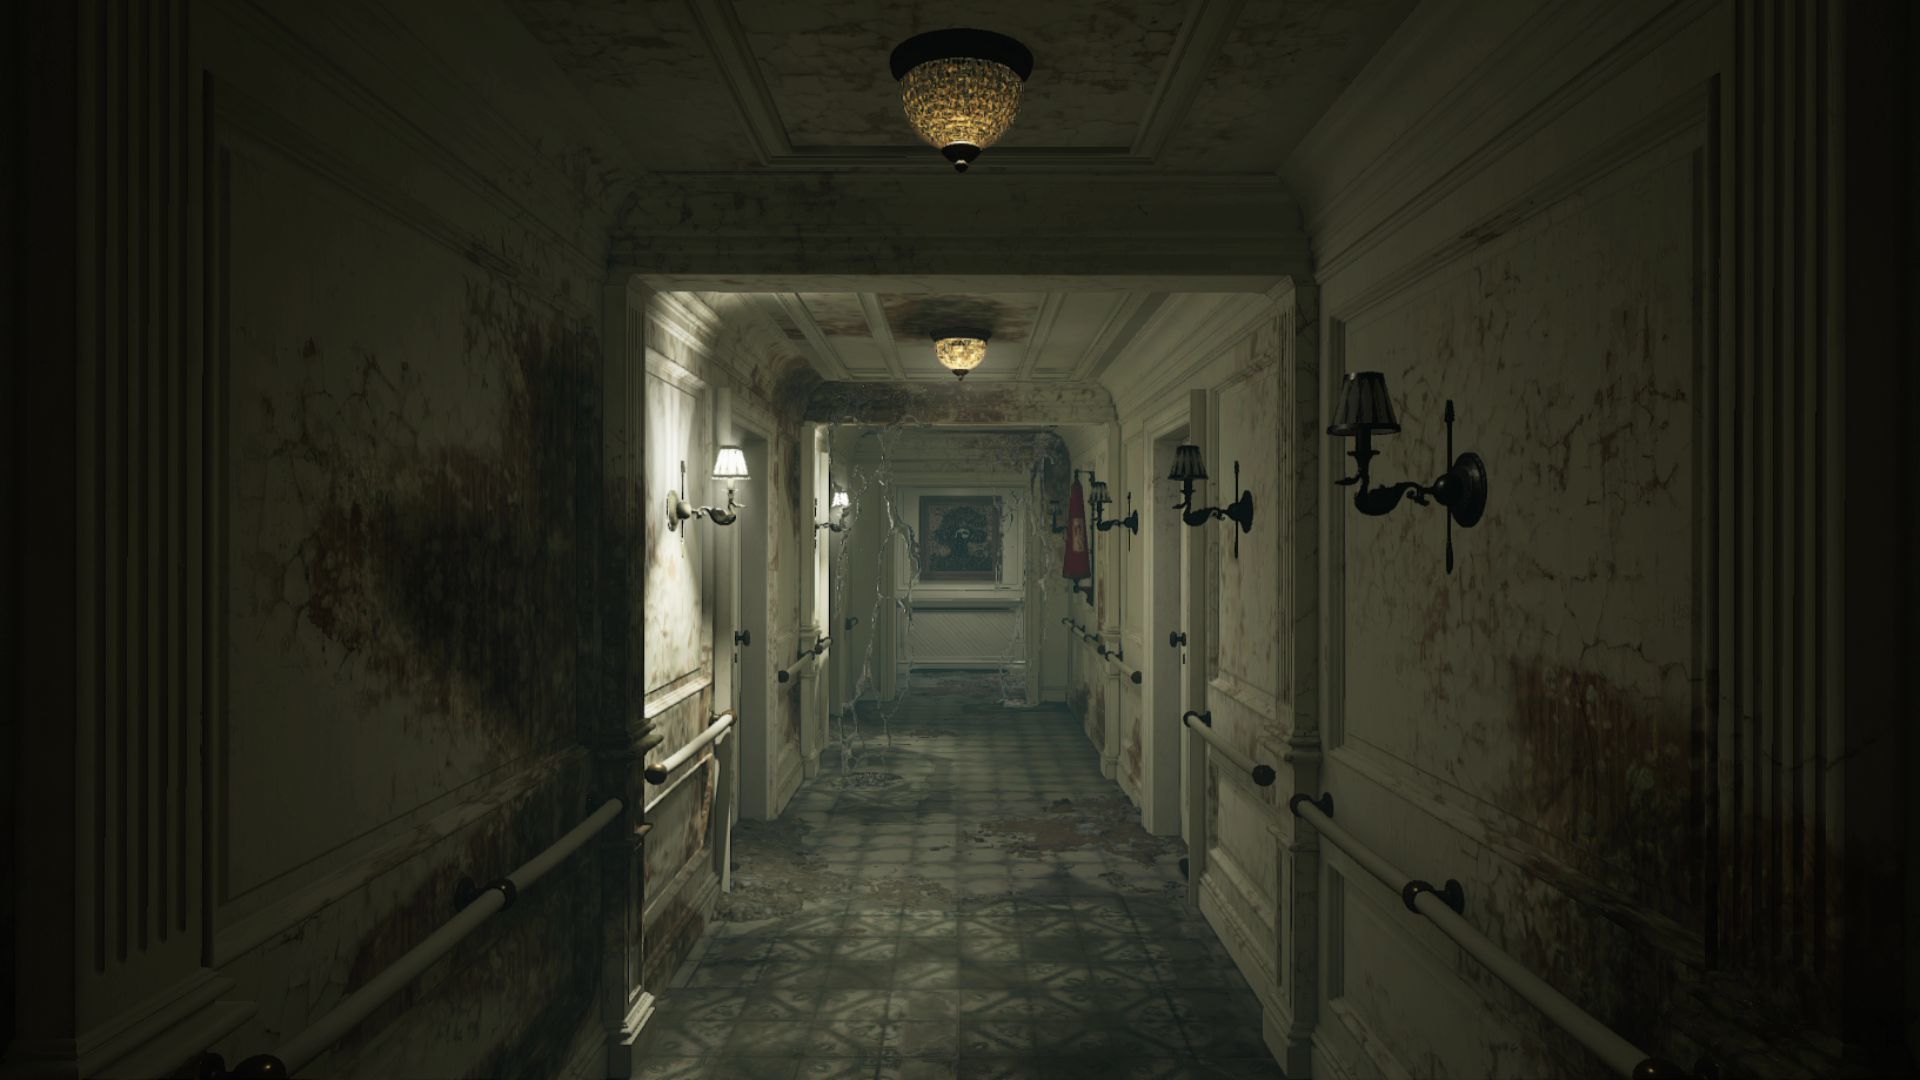 Layers of Fear 2 inceleme